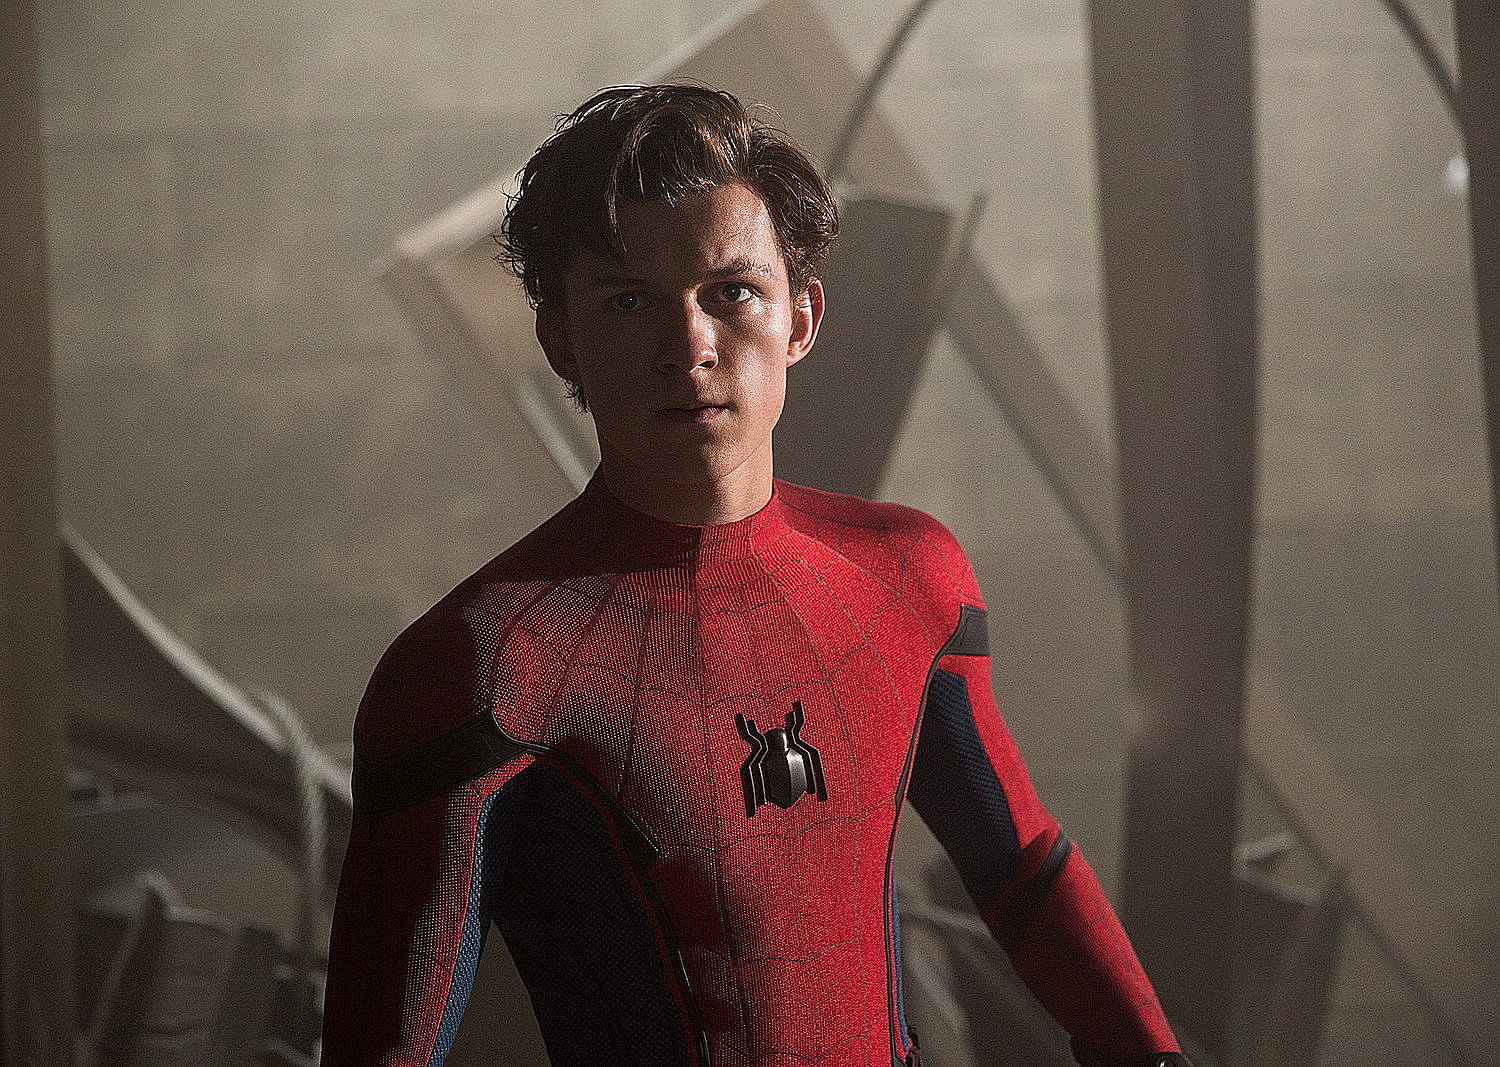 Tom Holland Says It May Be Time to 'Move On' From Spider-Man